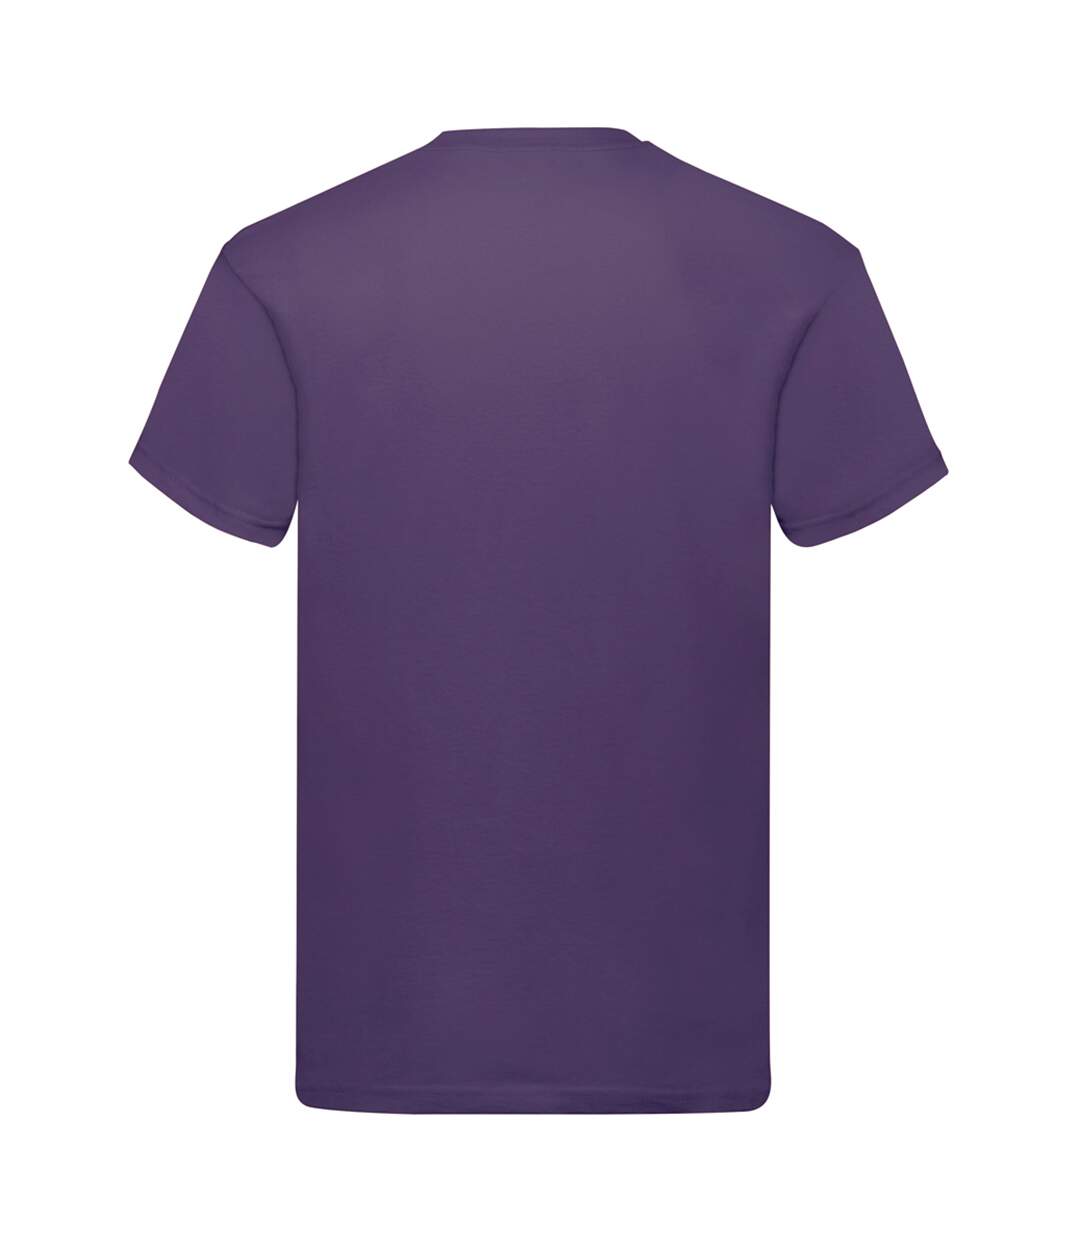 Fruit Of The Loom  - T-shirt manches courtes - Homme (Violet) - UTPC124